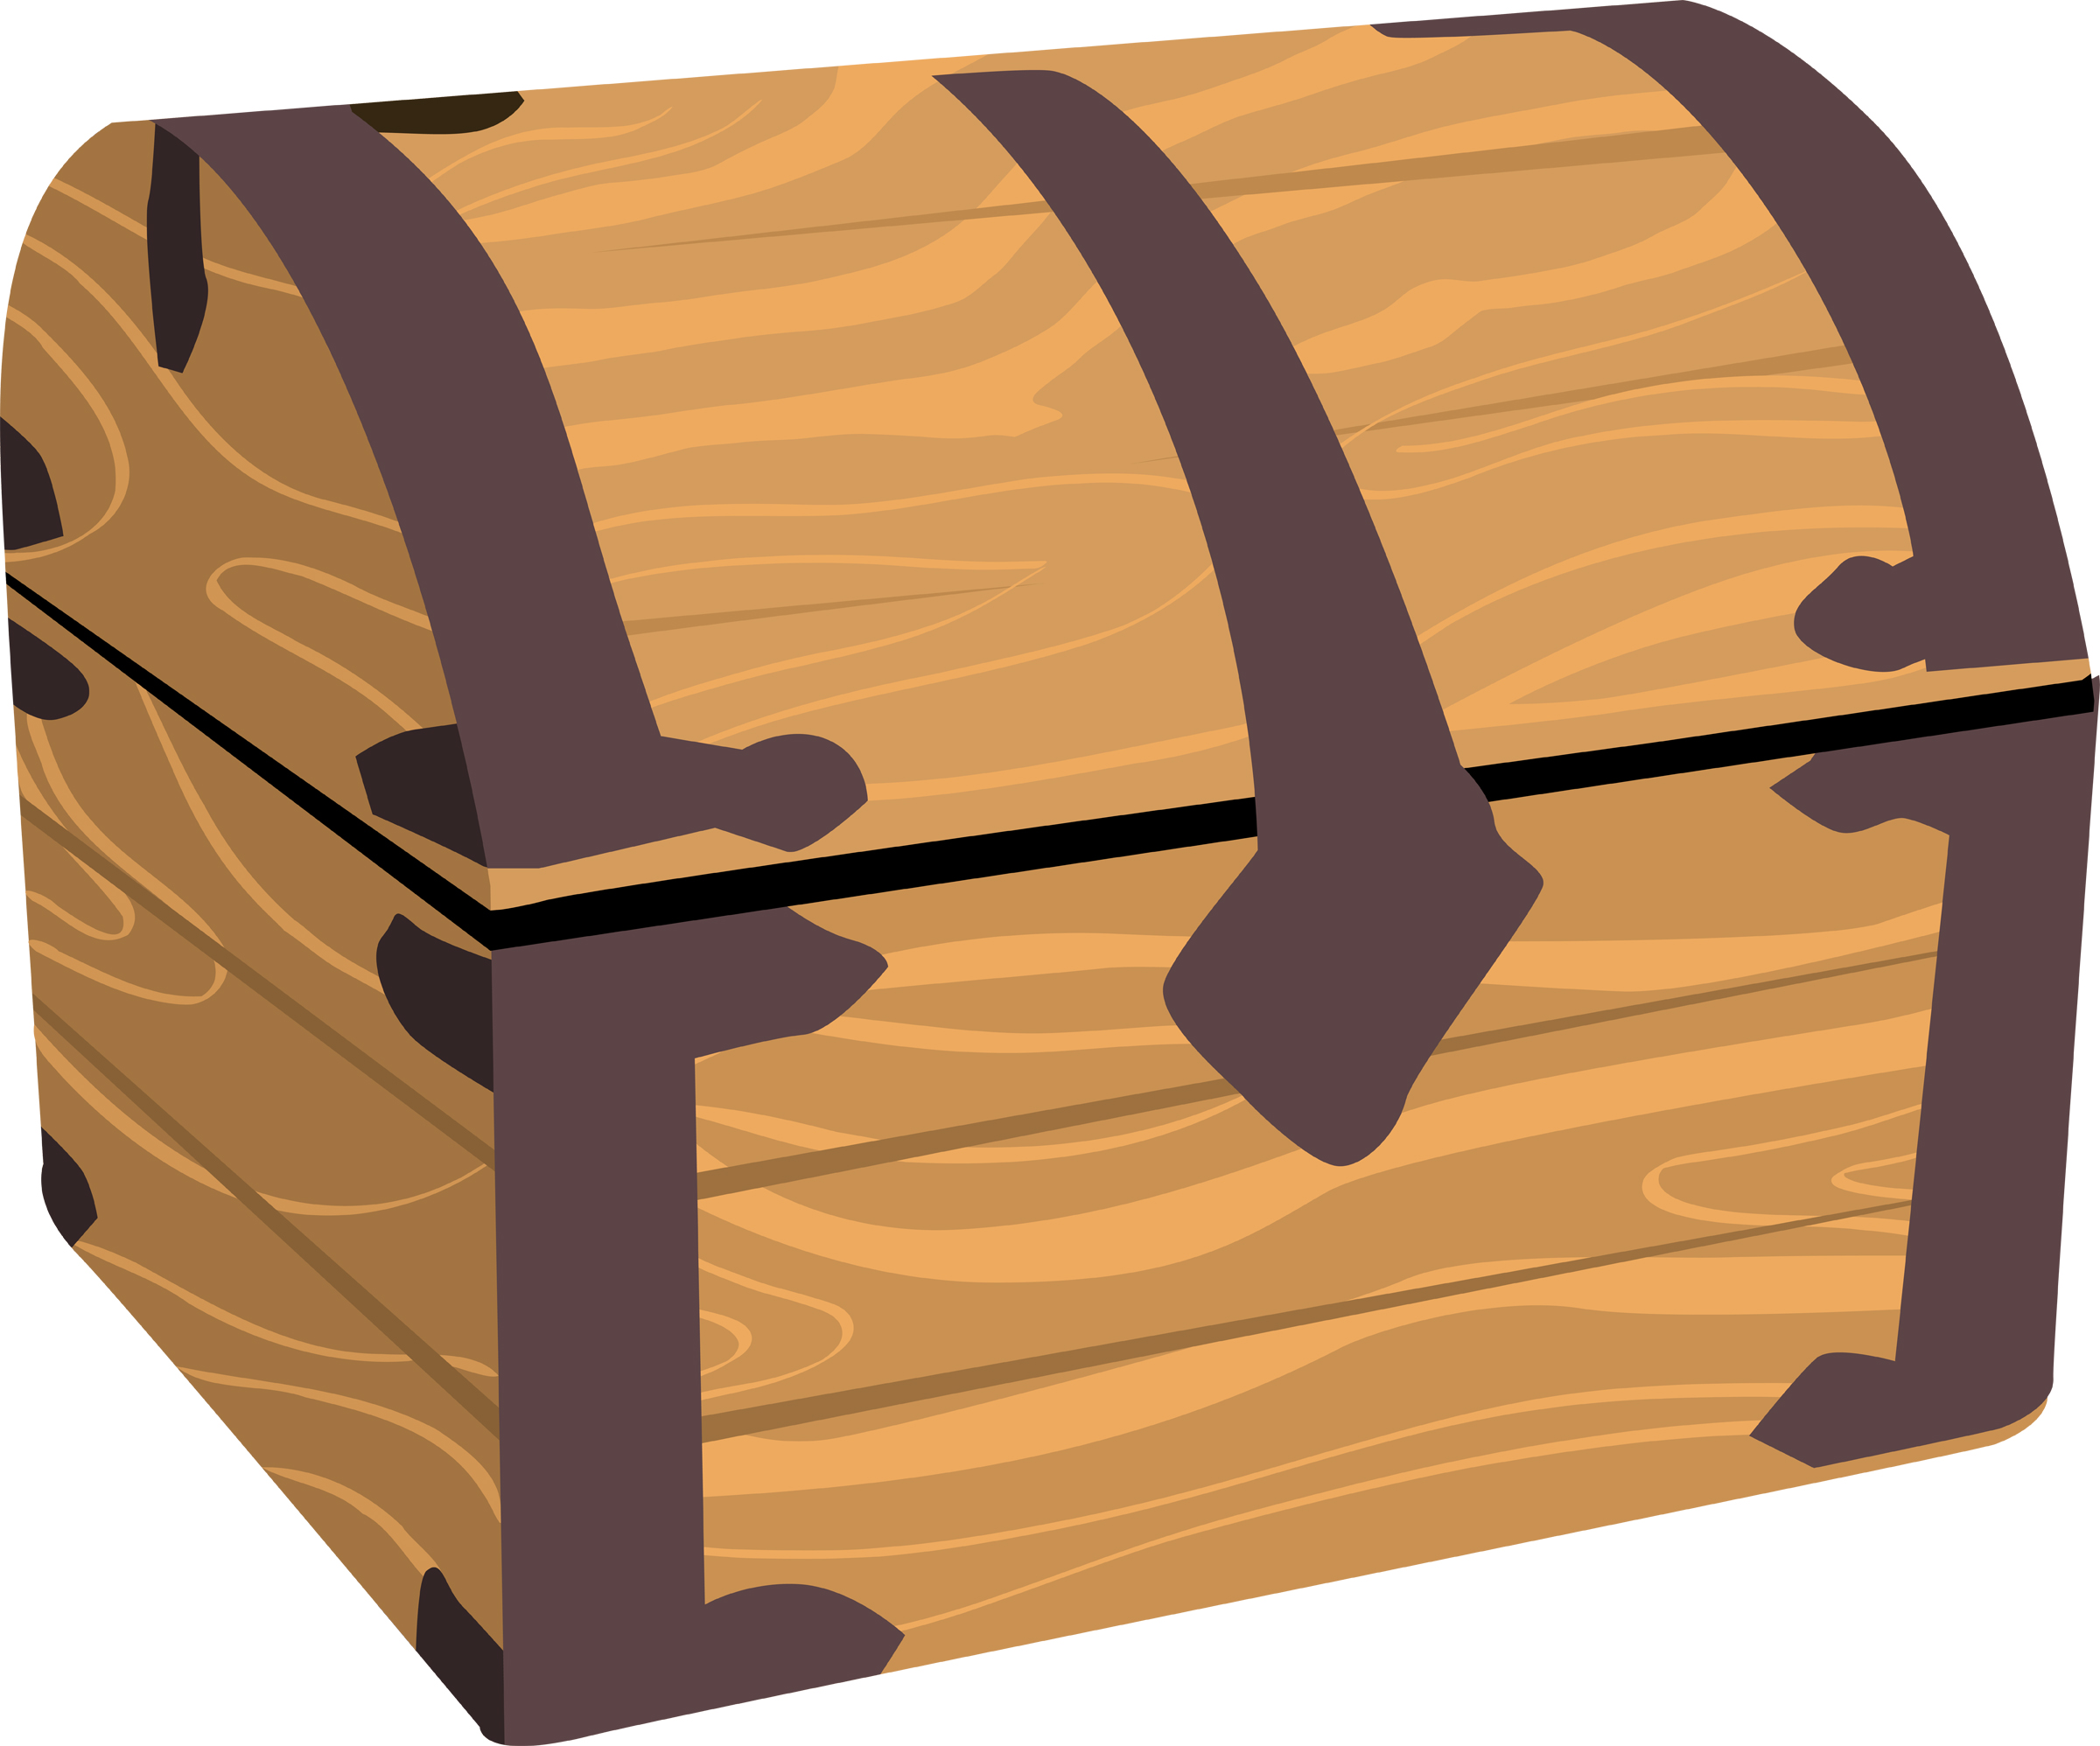 free clipart images treasure chest - photo #42